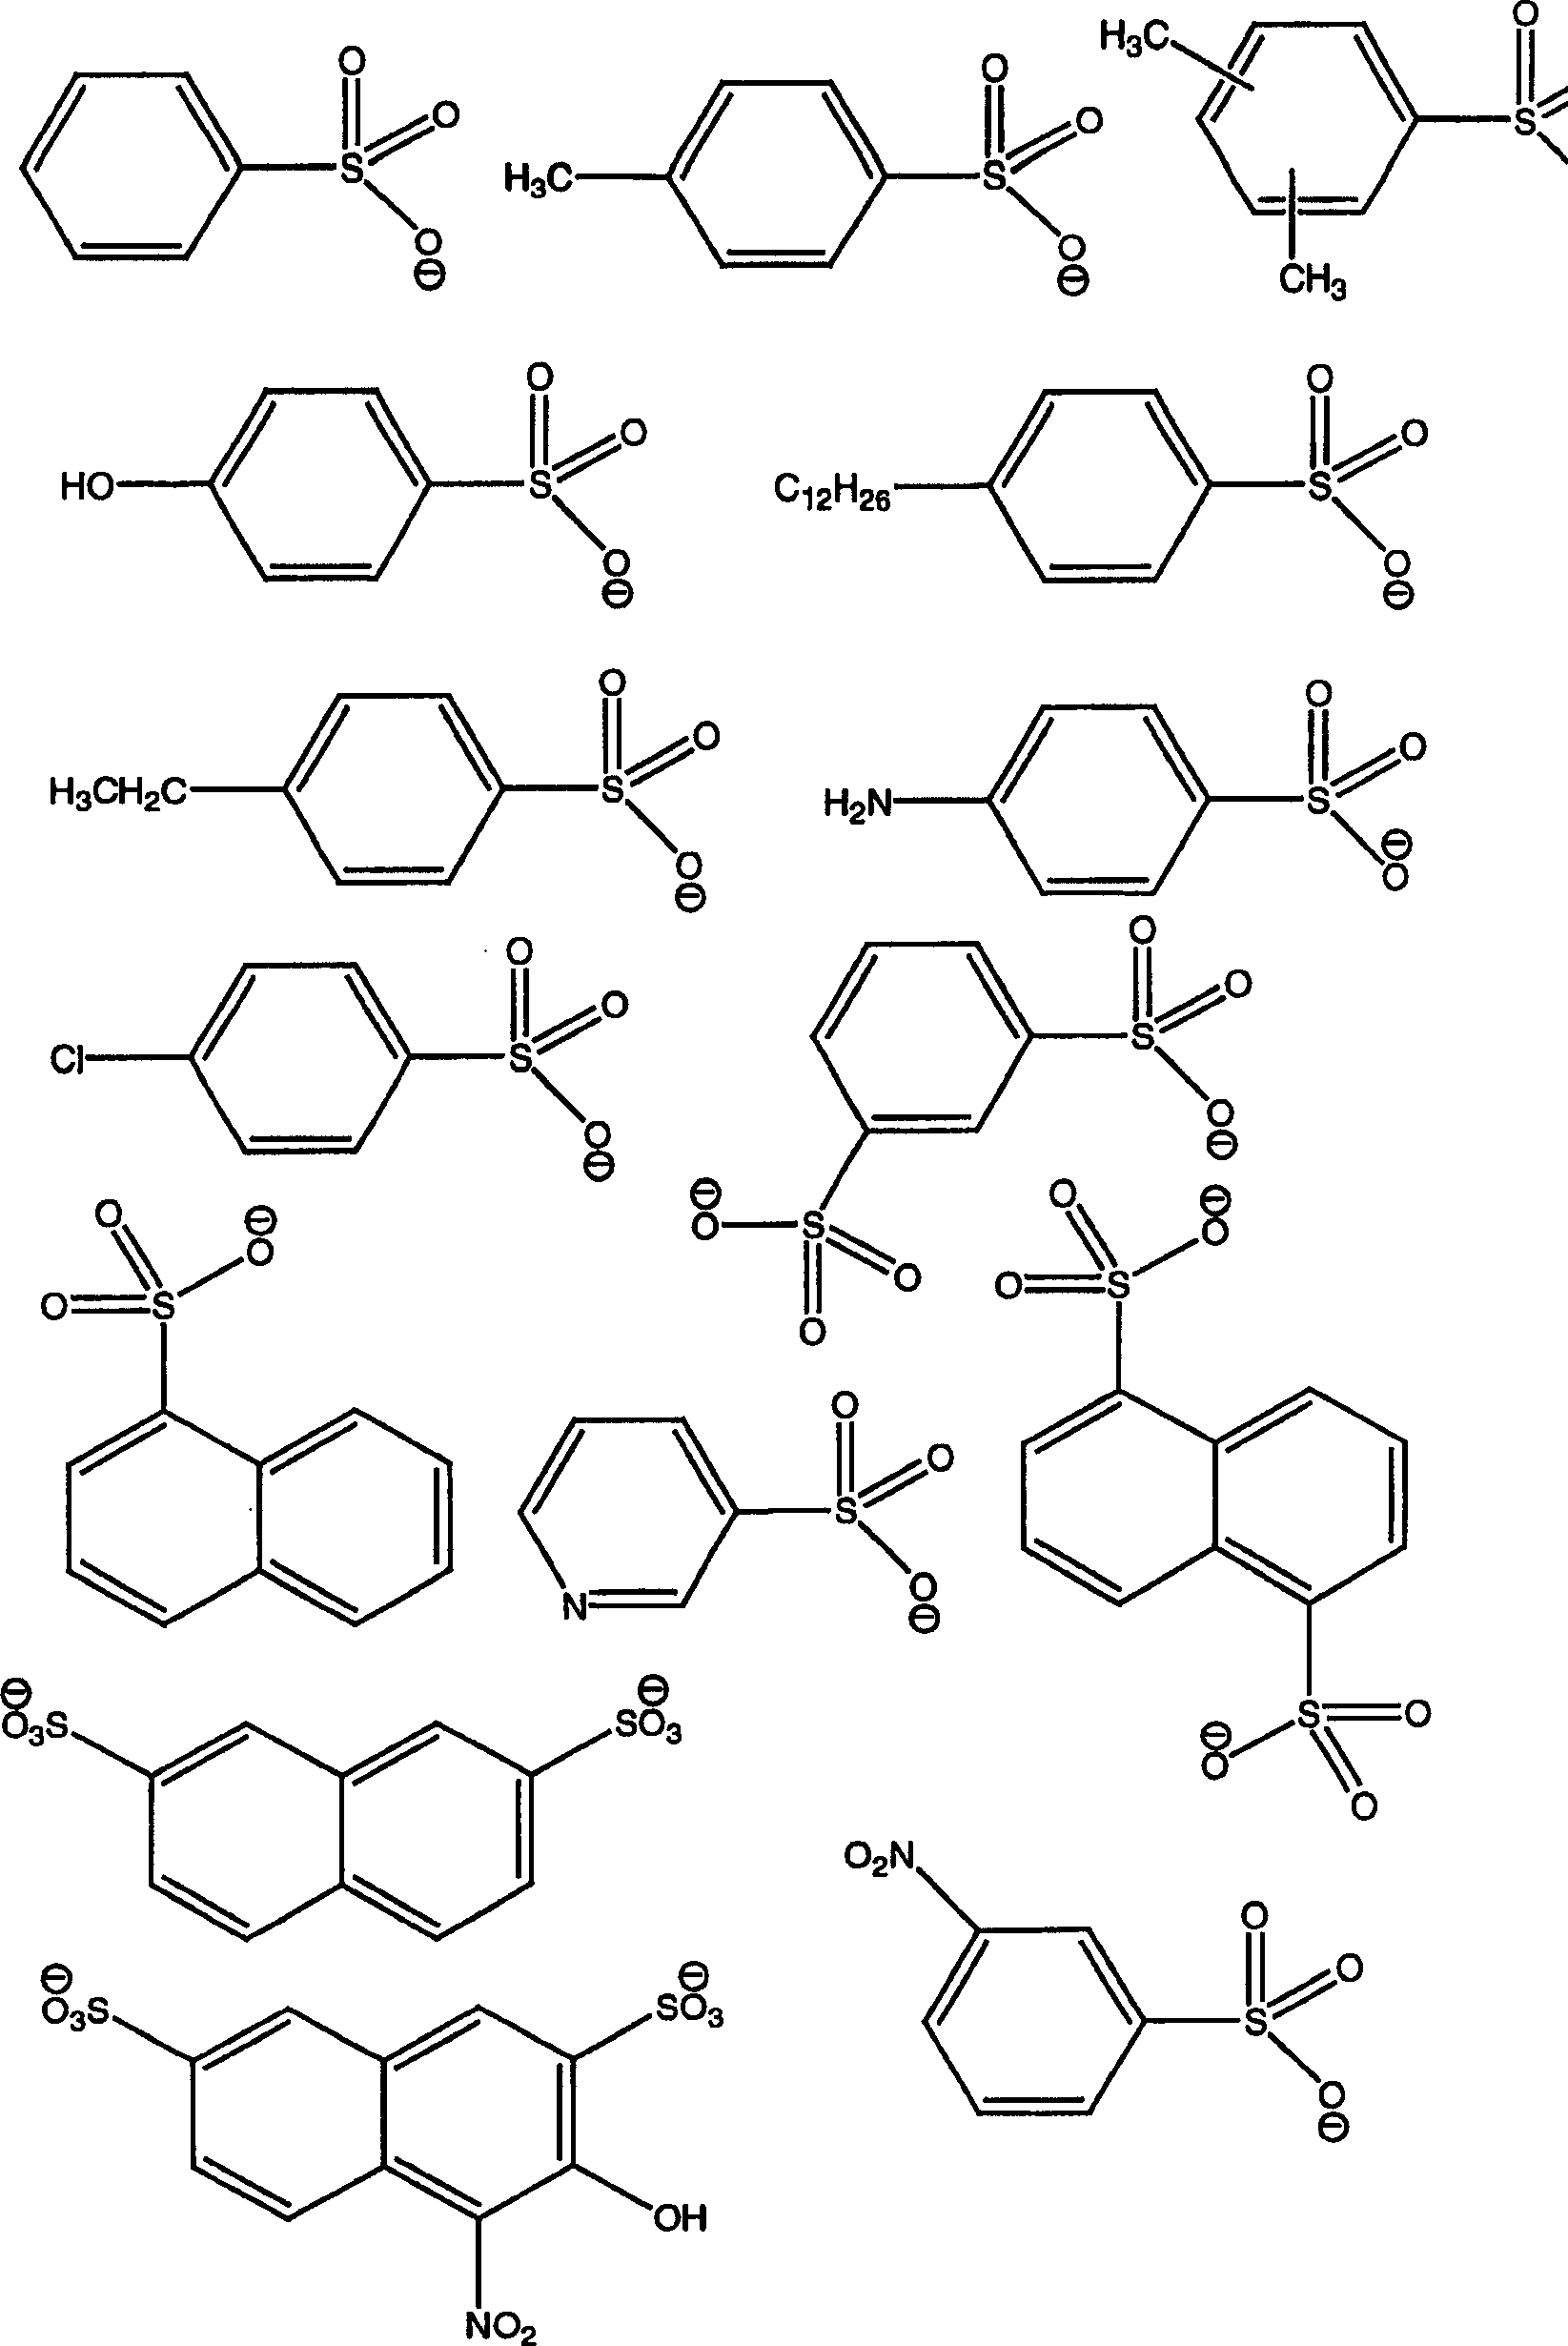 Solvents for use in the treatment of lignin-containing materials